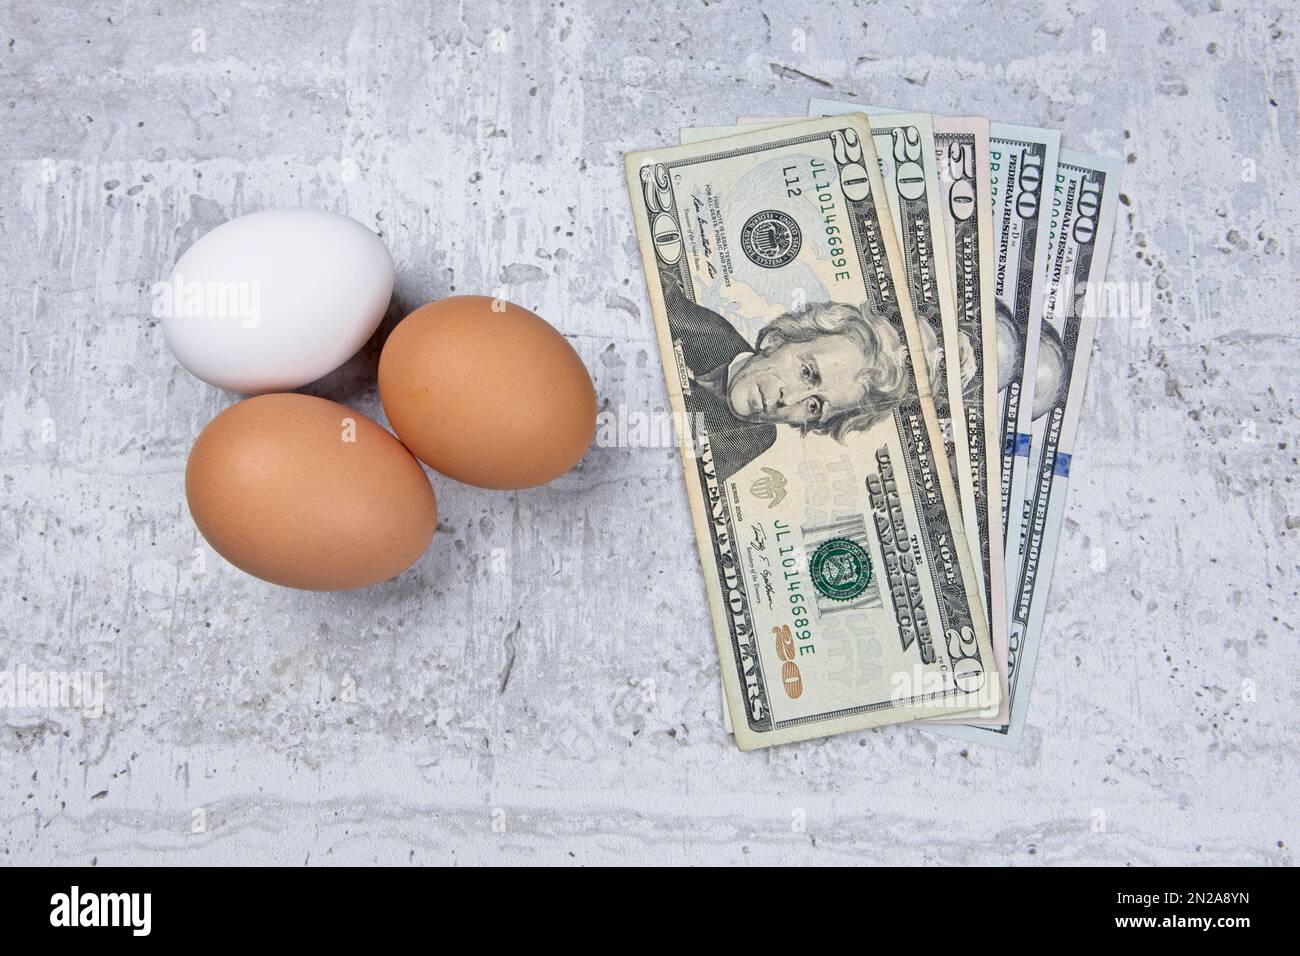 A conceptual flatlay photo of showing eggs and a fanned out stack of cash depicting the rising cost of eggs and food. Stock Photo